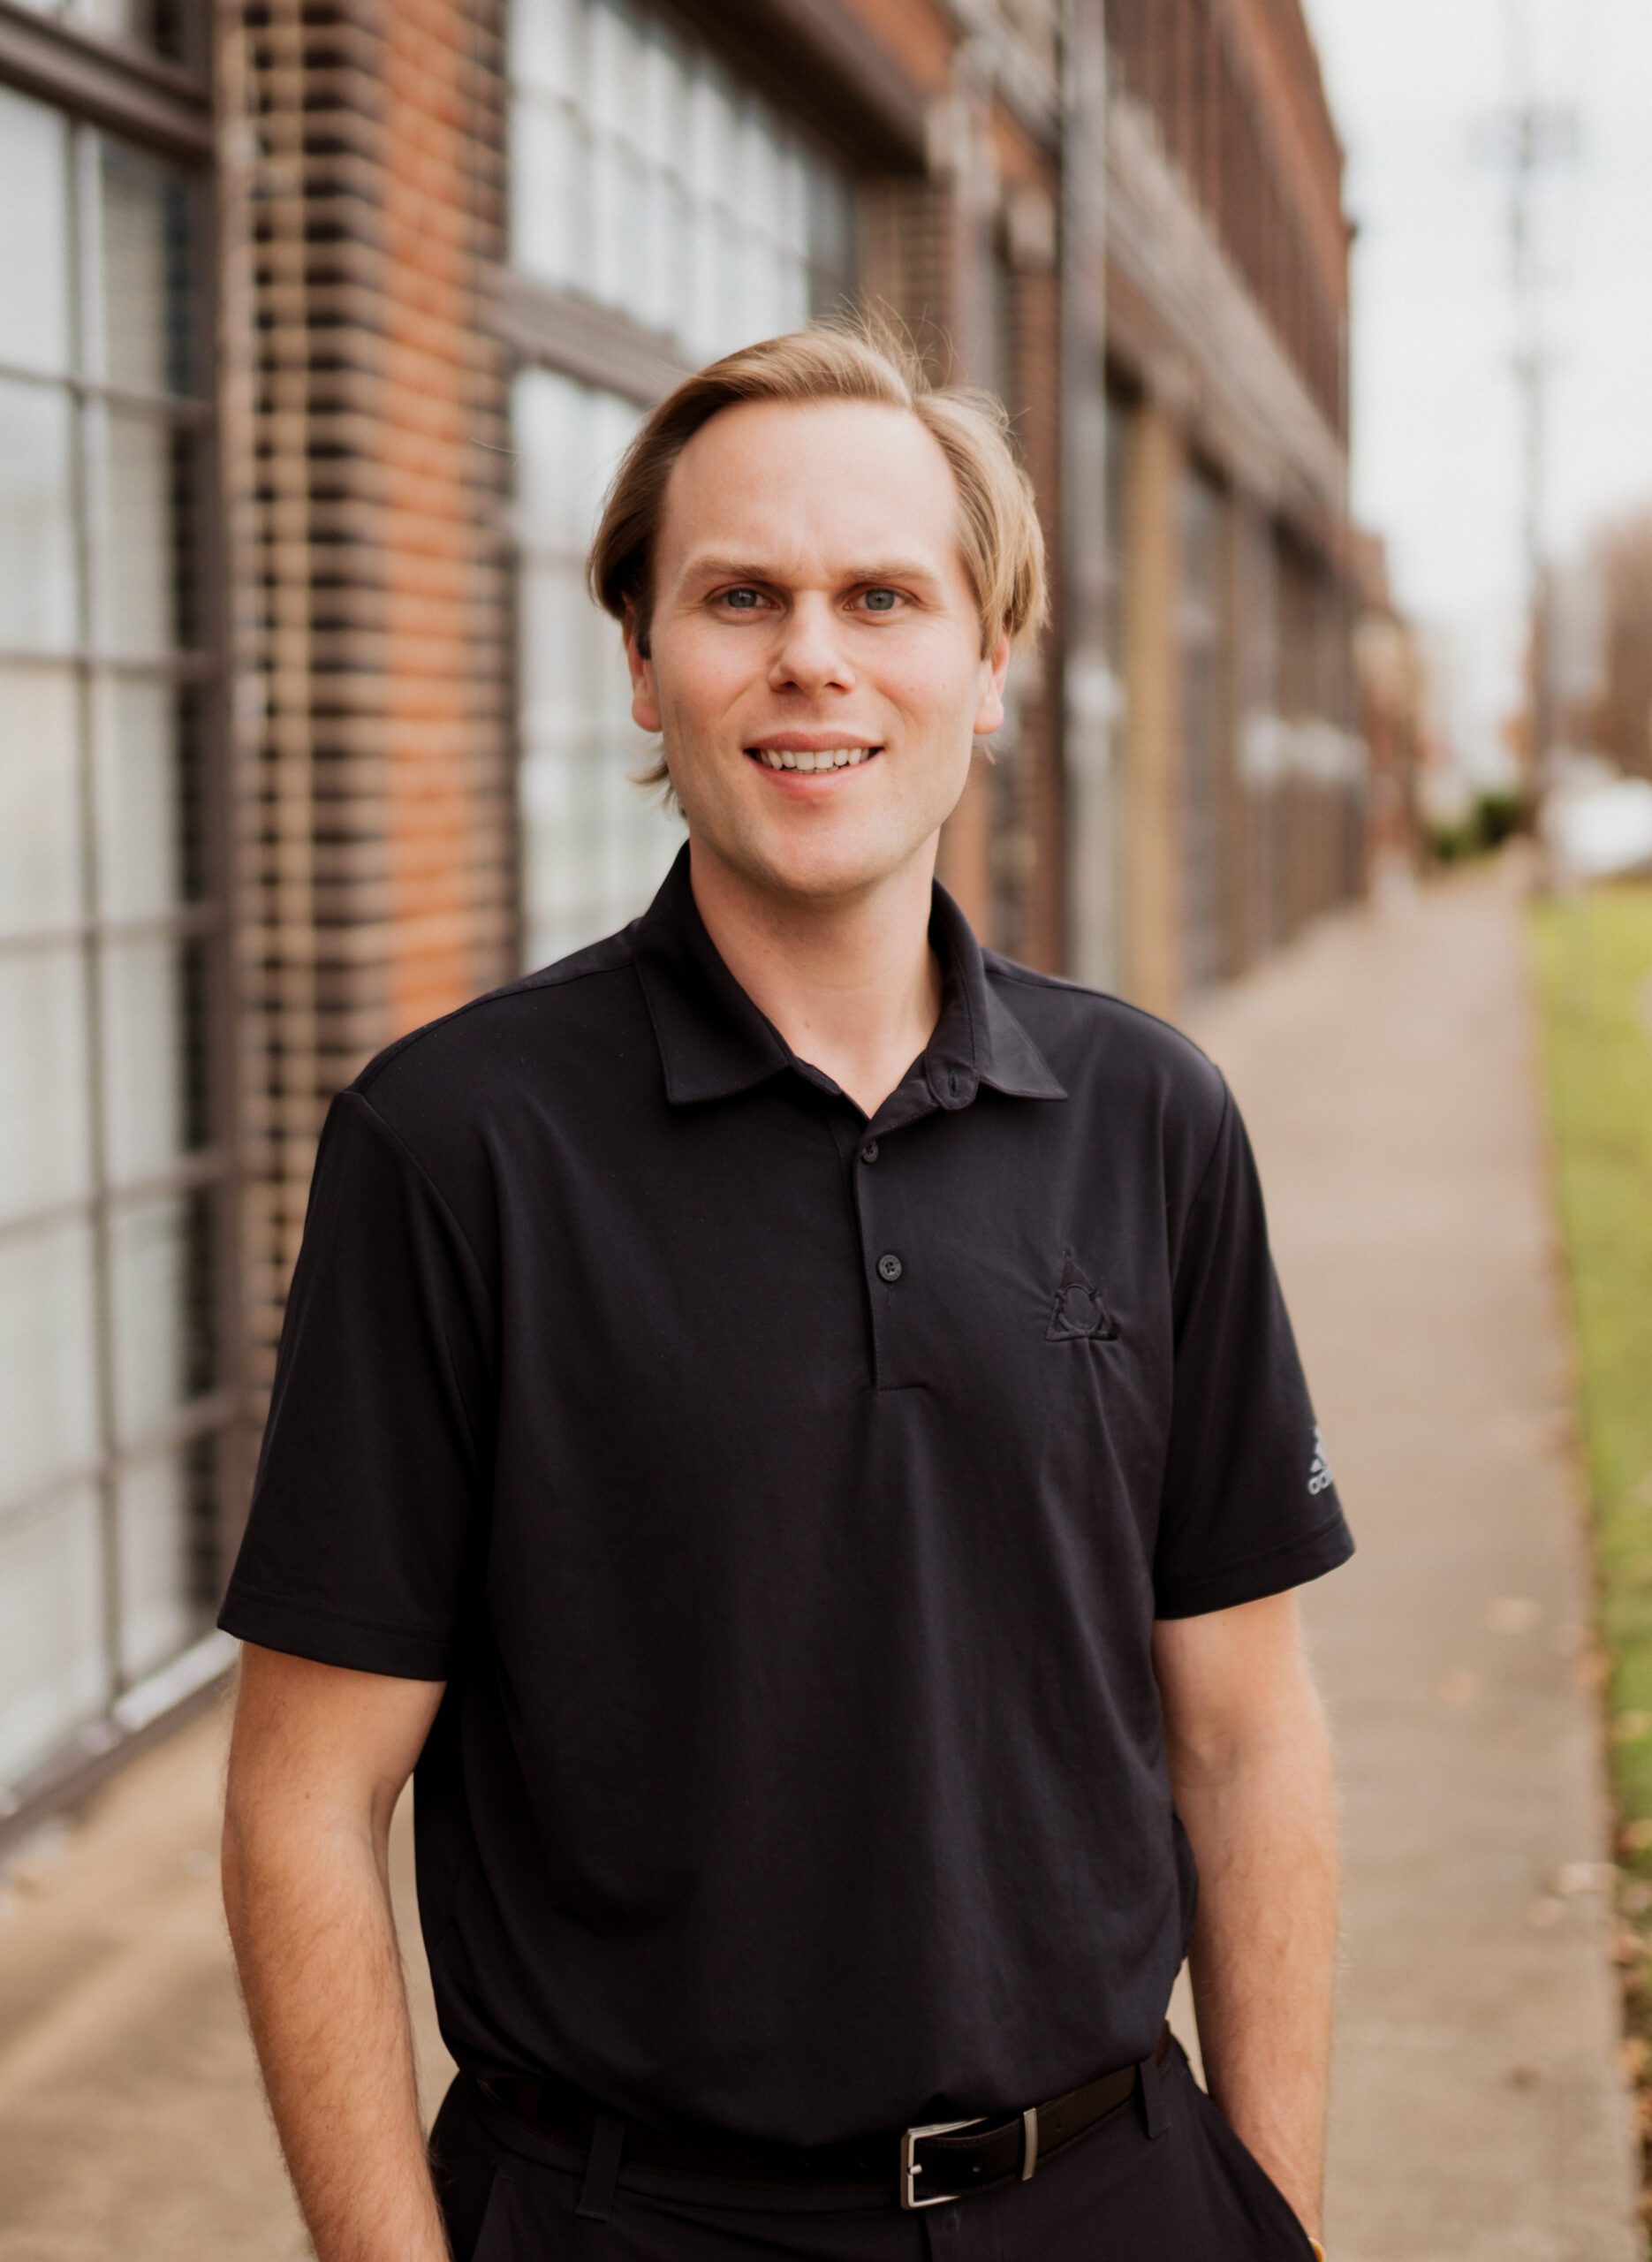 Michael Dunham smiling with hands in his pockets standing in front of a brick wall wearing a black polo shirt